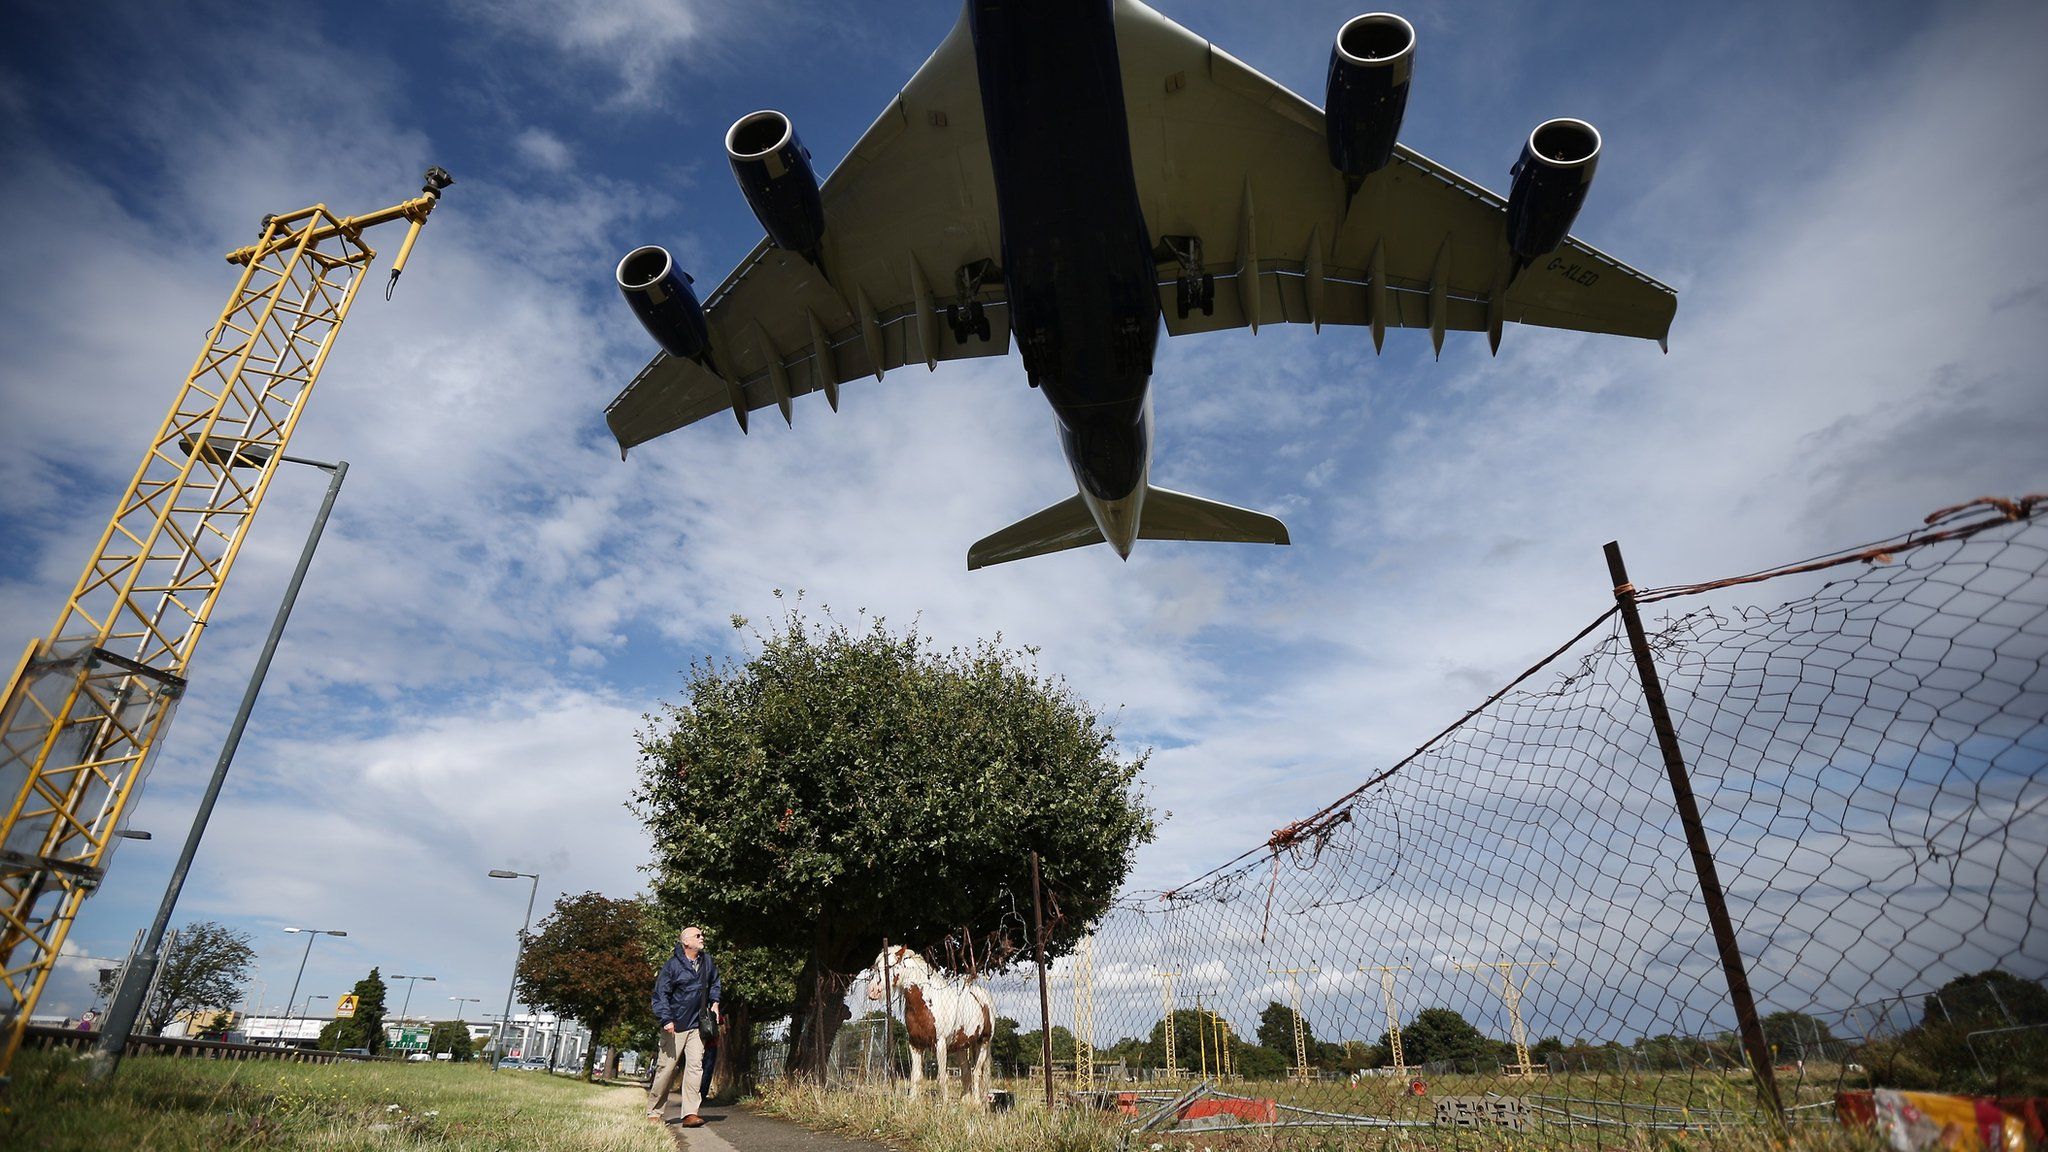 A passenger plane comes into land at Heathrow Airport, west London